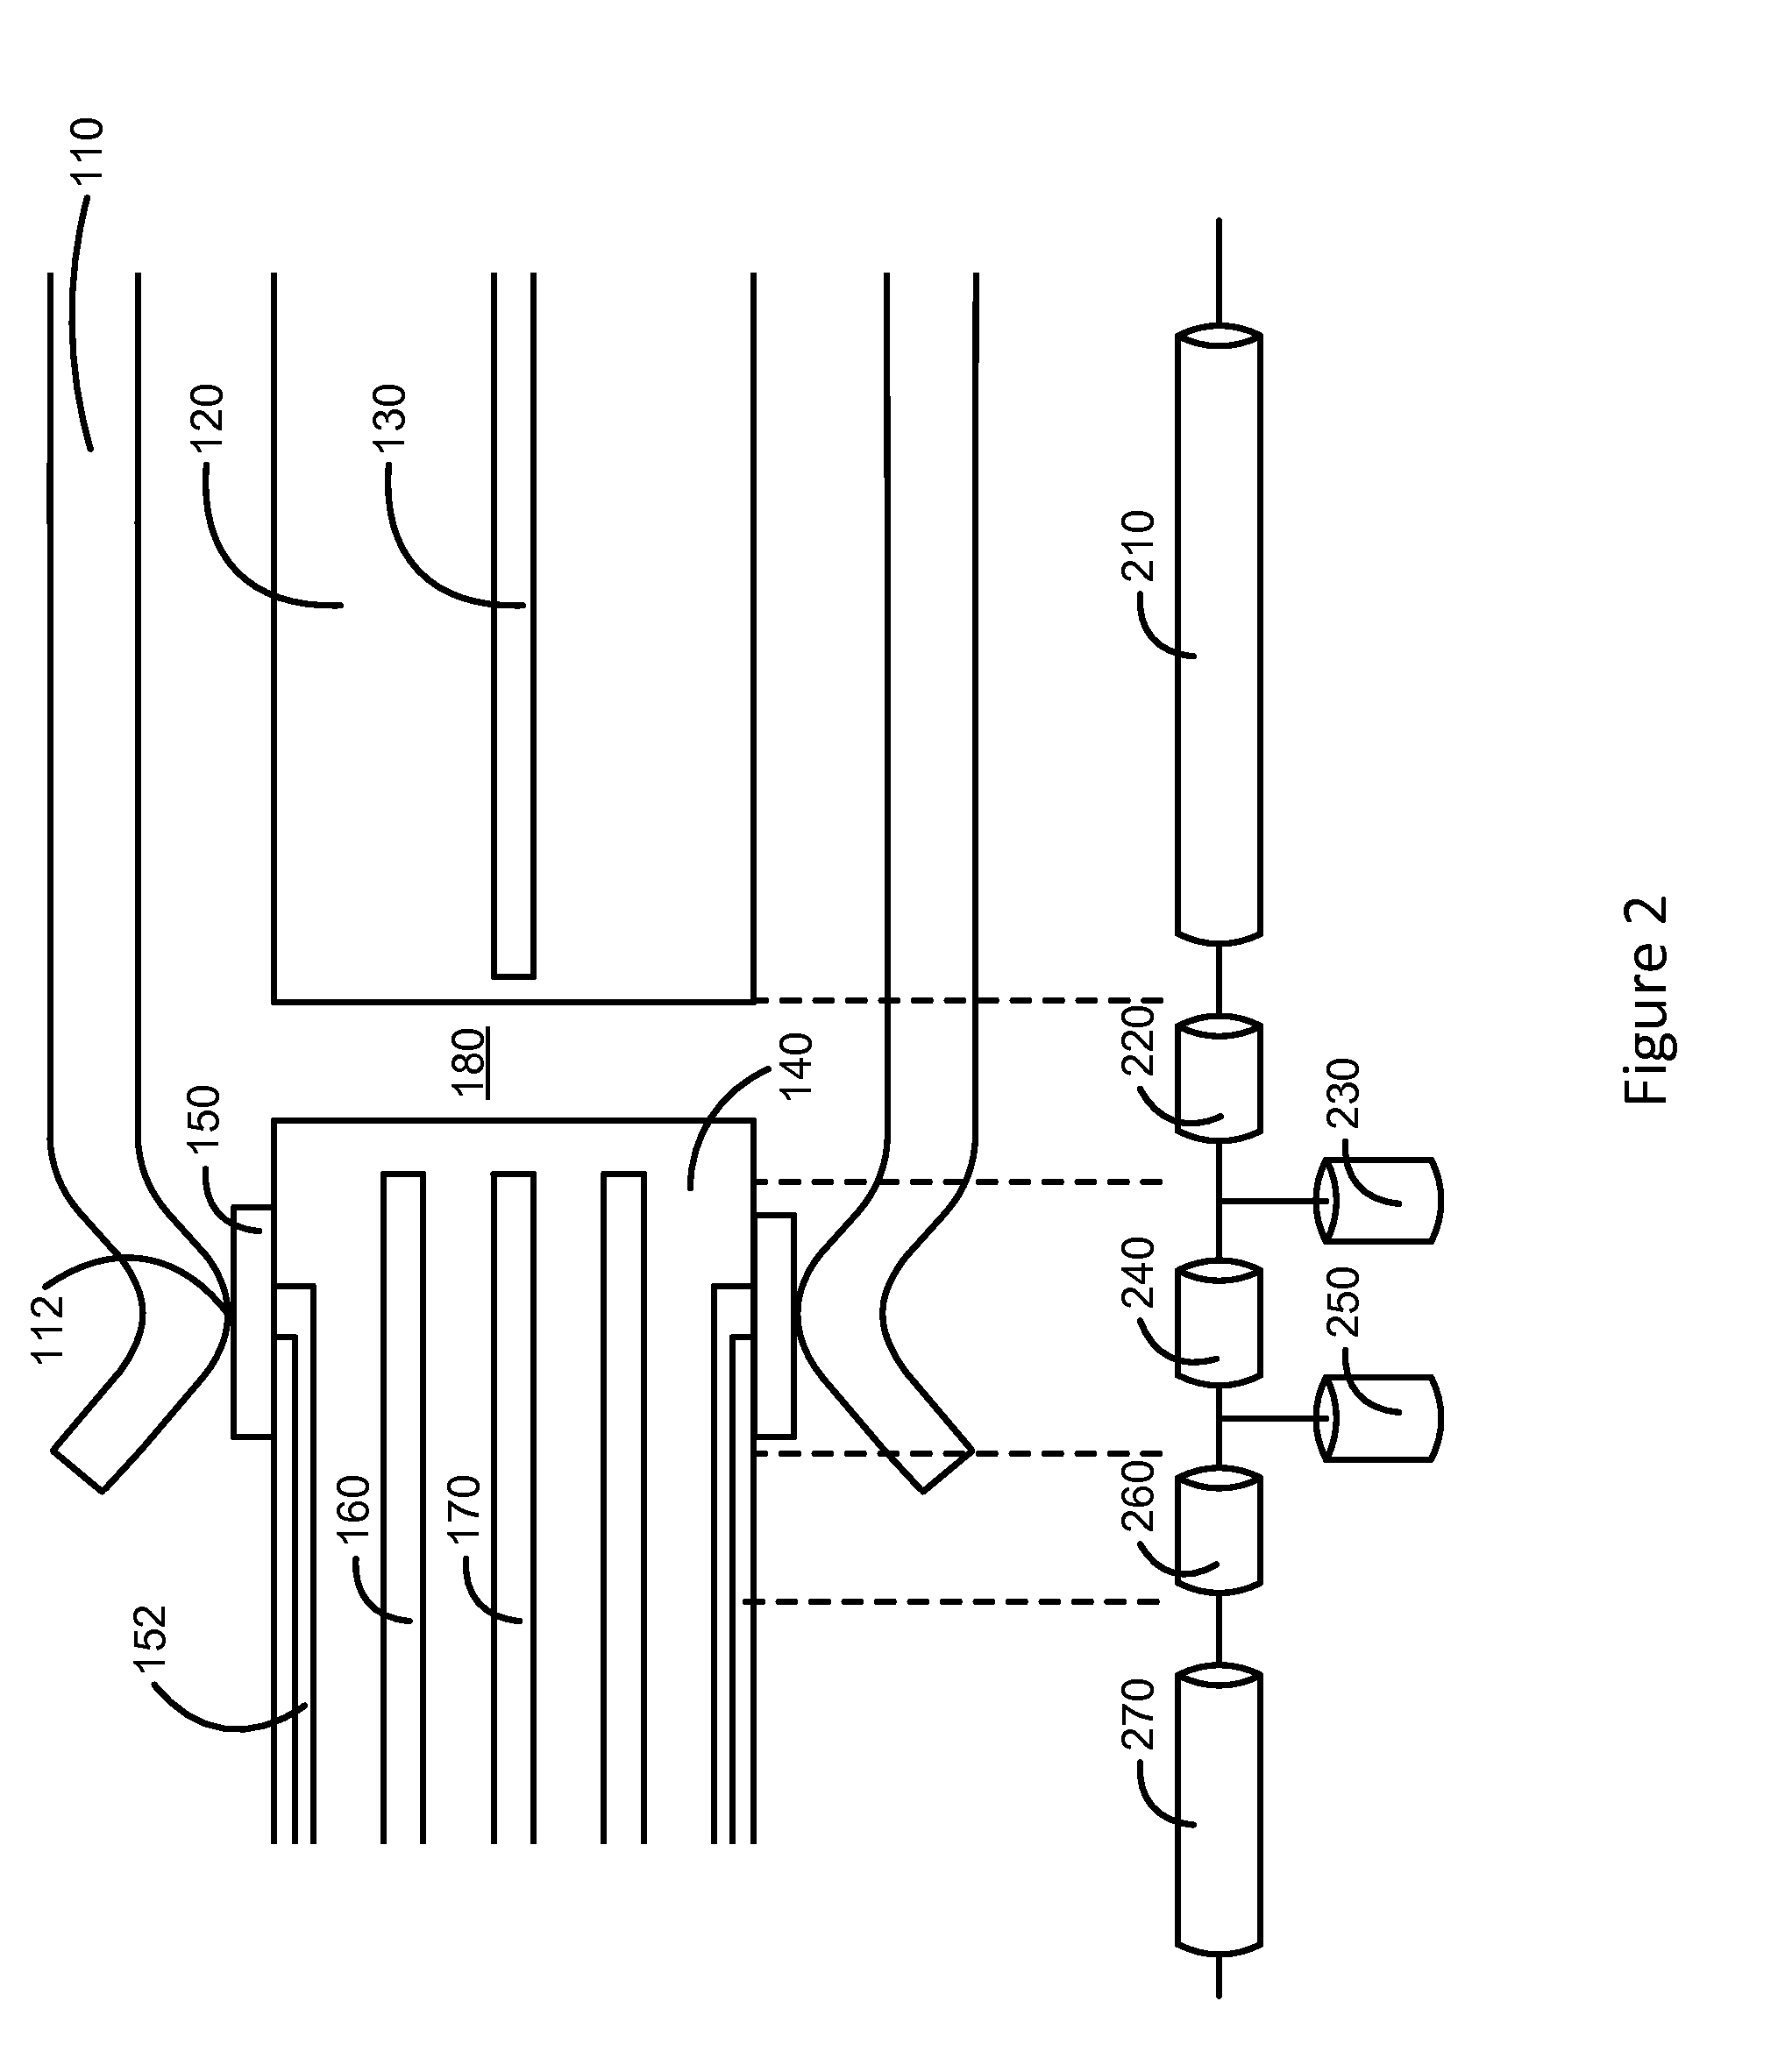 Connector system impedance matching